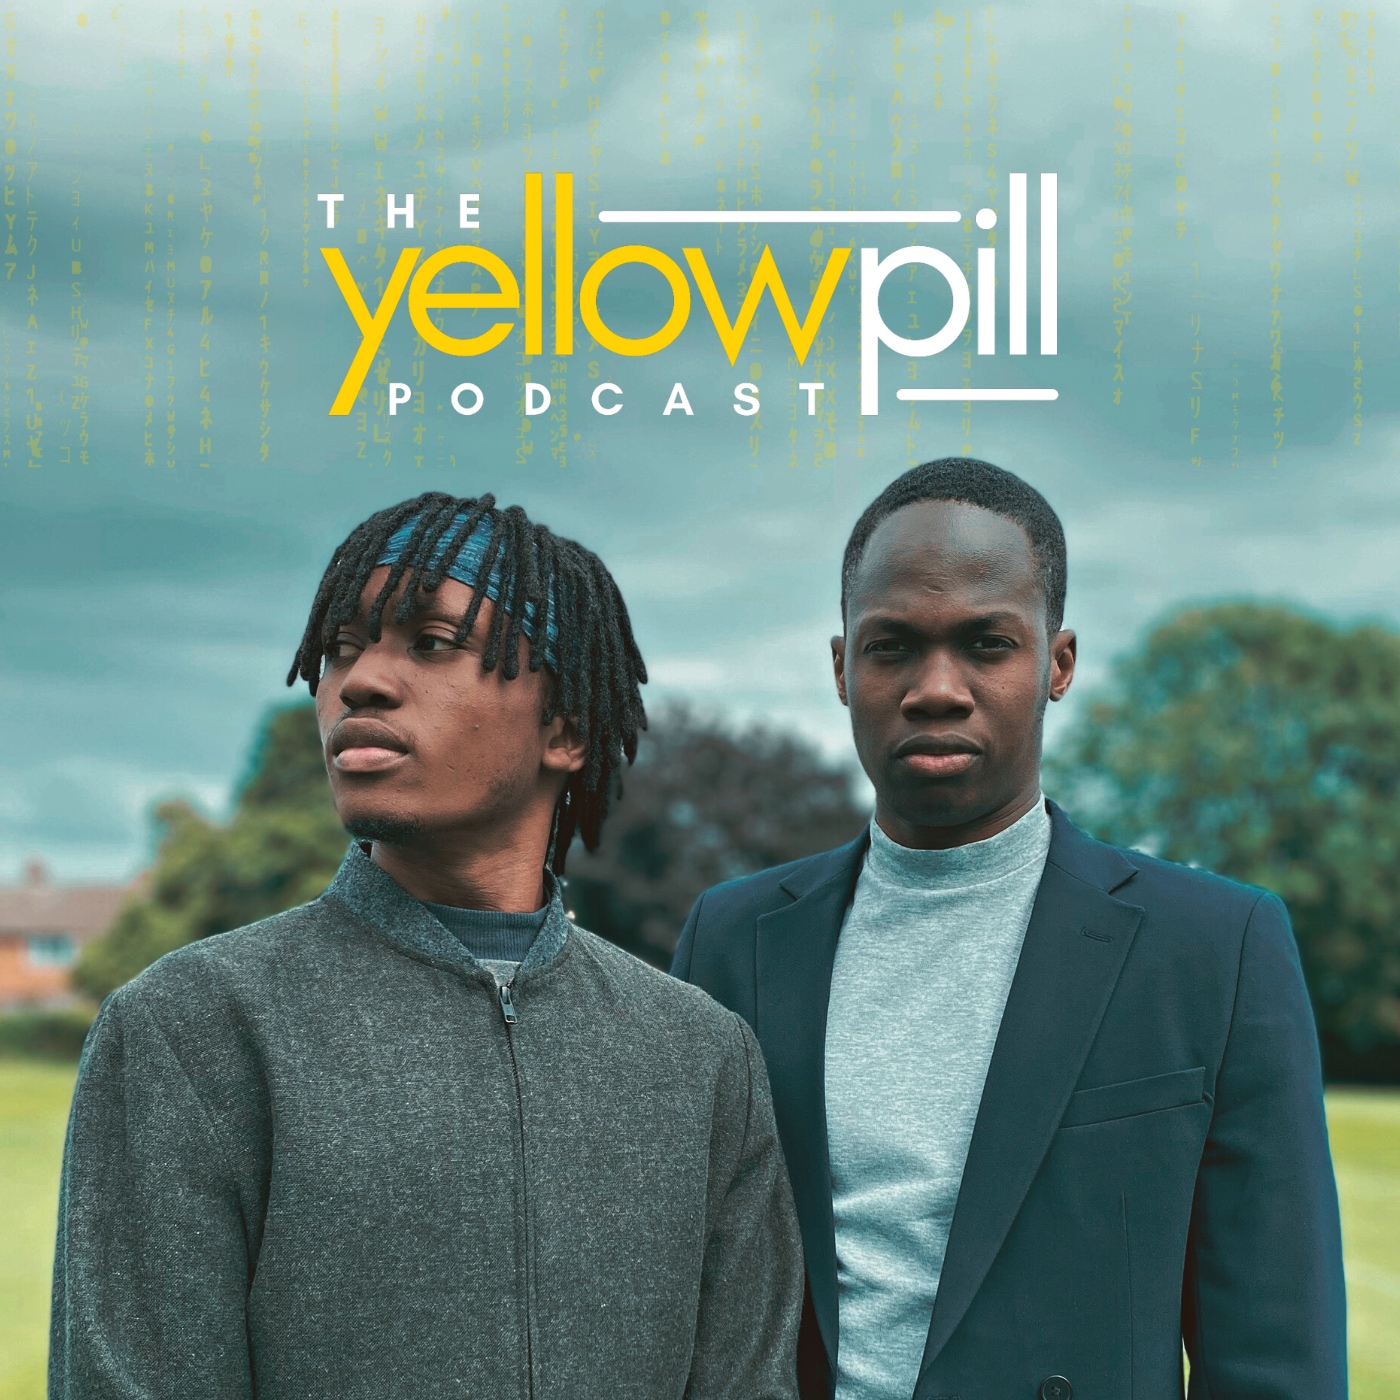 The Yellow Pill Podcast